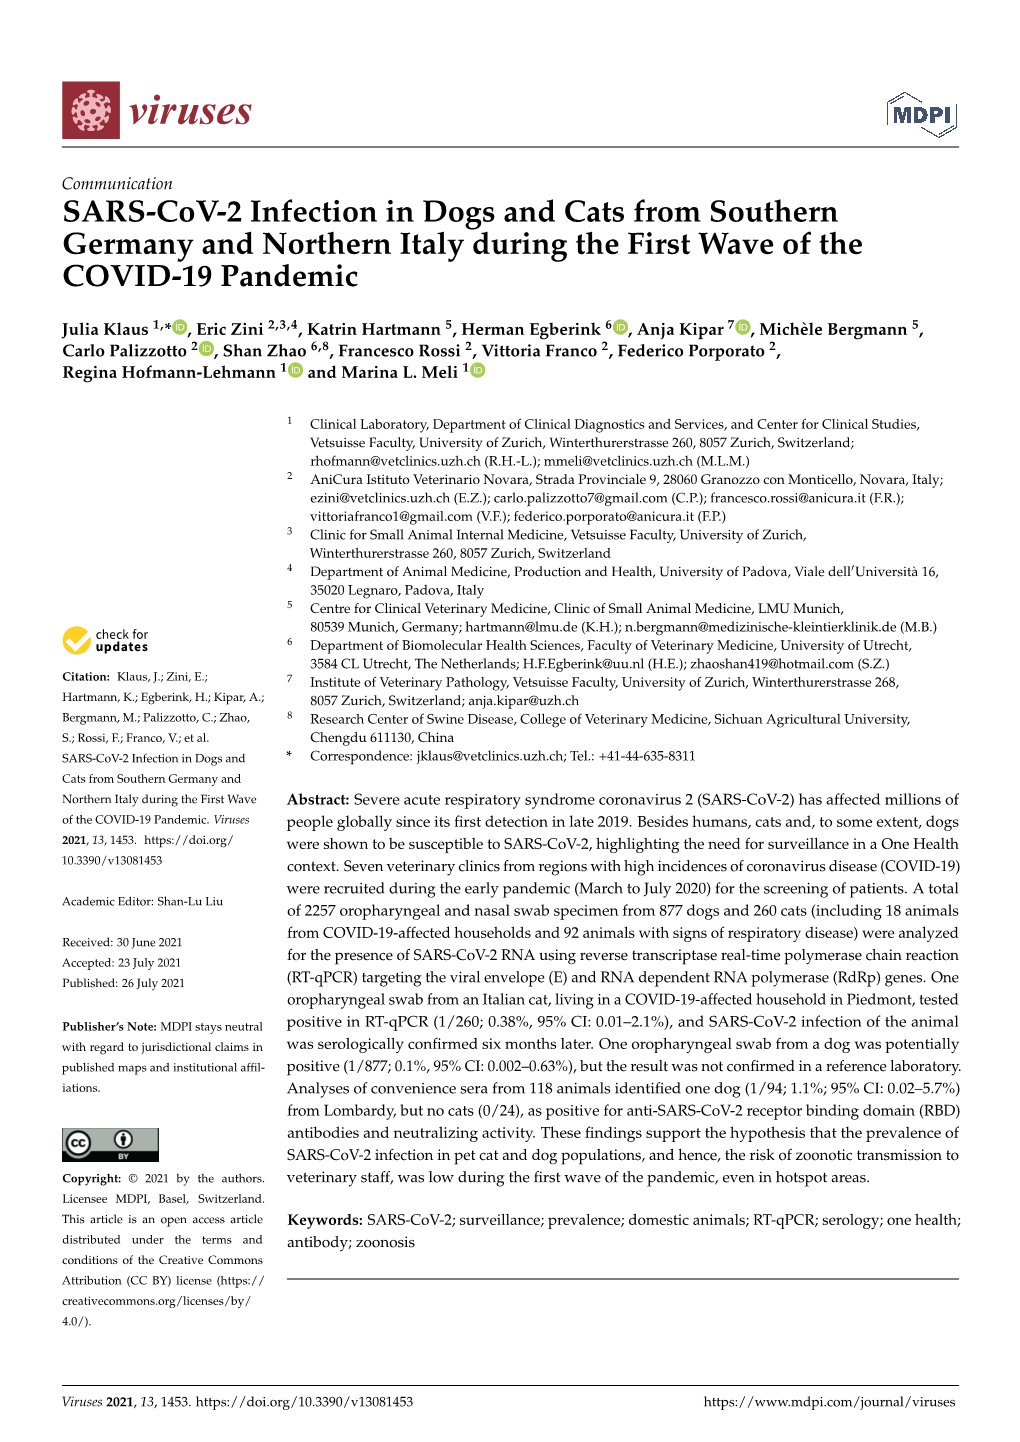 SARS-Cov-2 Infection in Dogs and Cats from Southern Germany and Northern Italy During the First Wave of the COVID-19 Pandemic